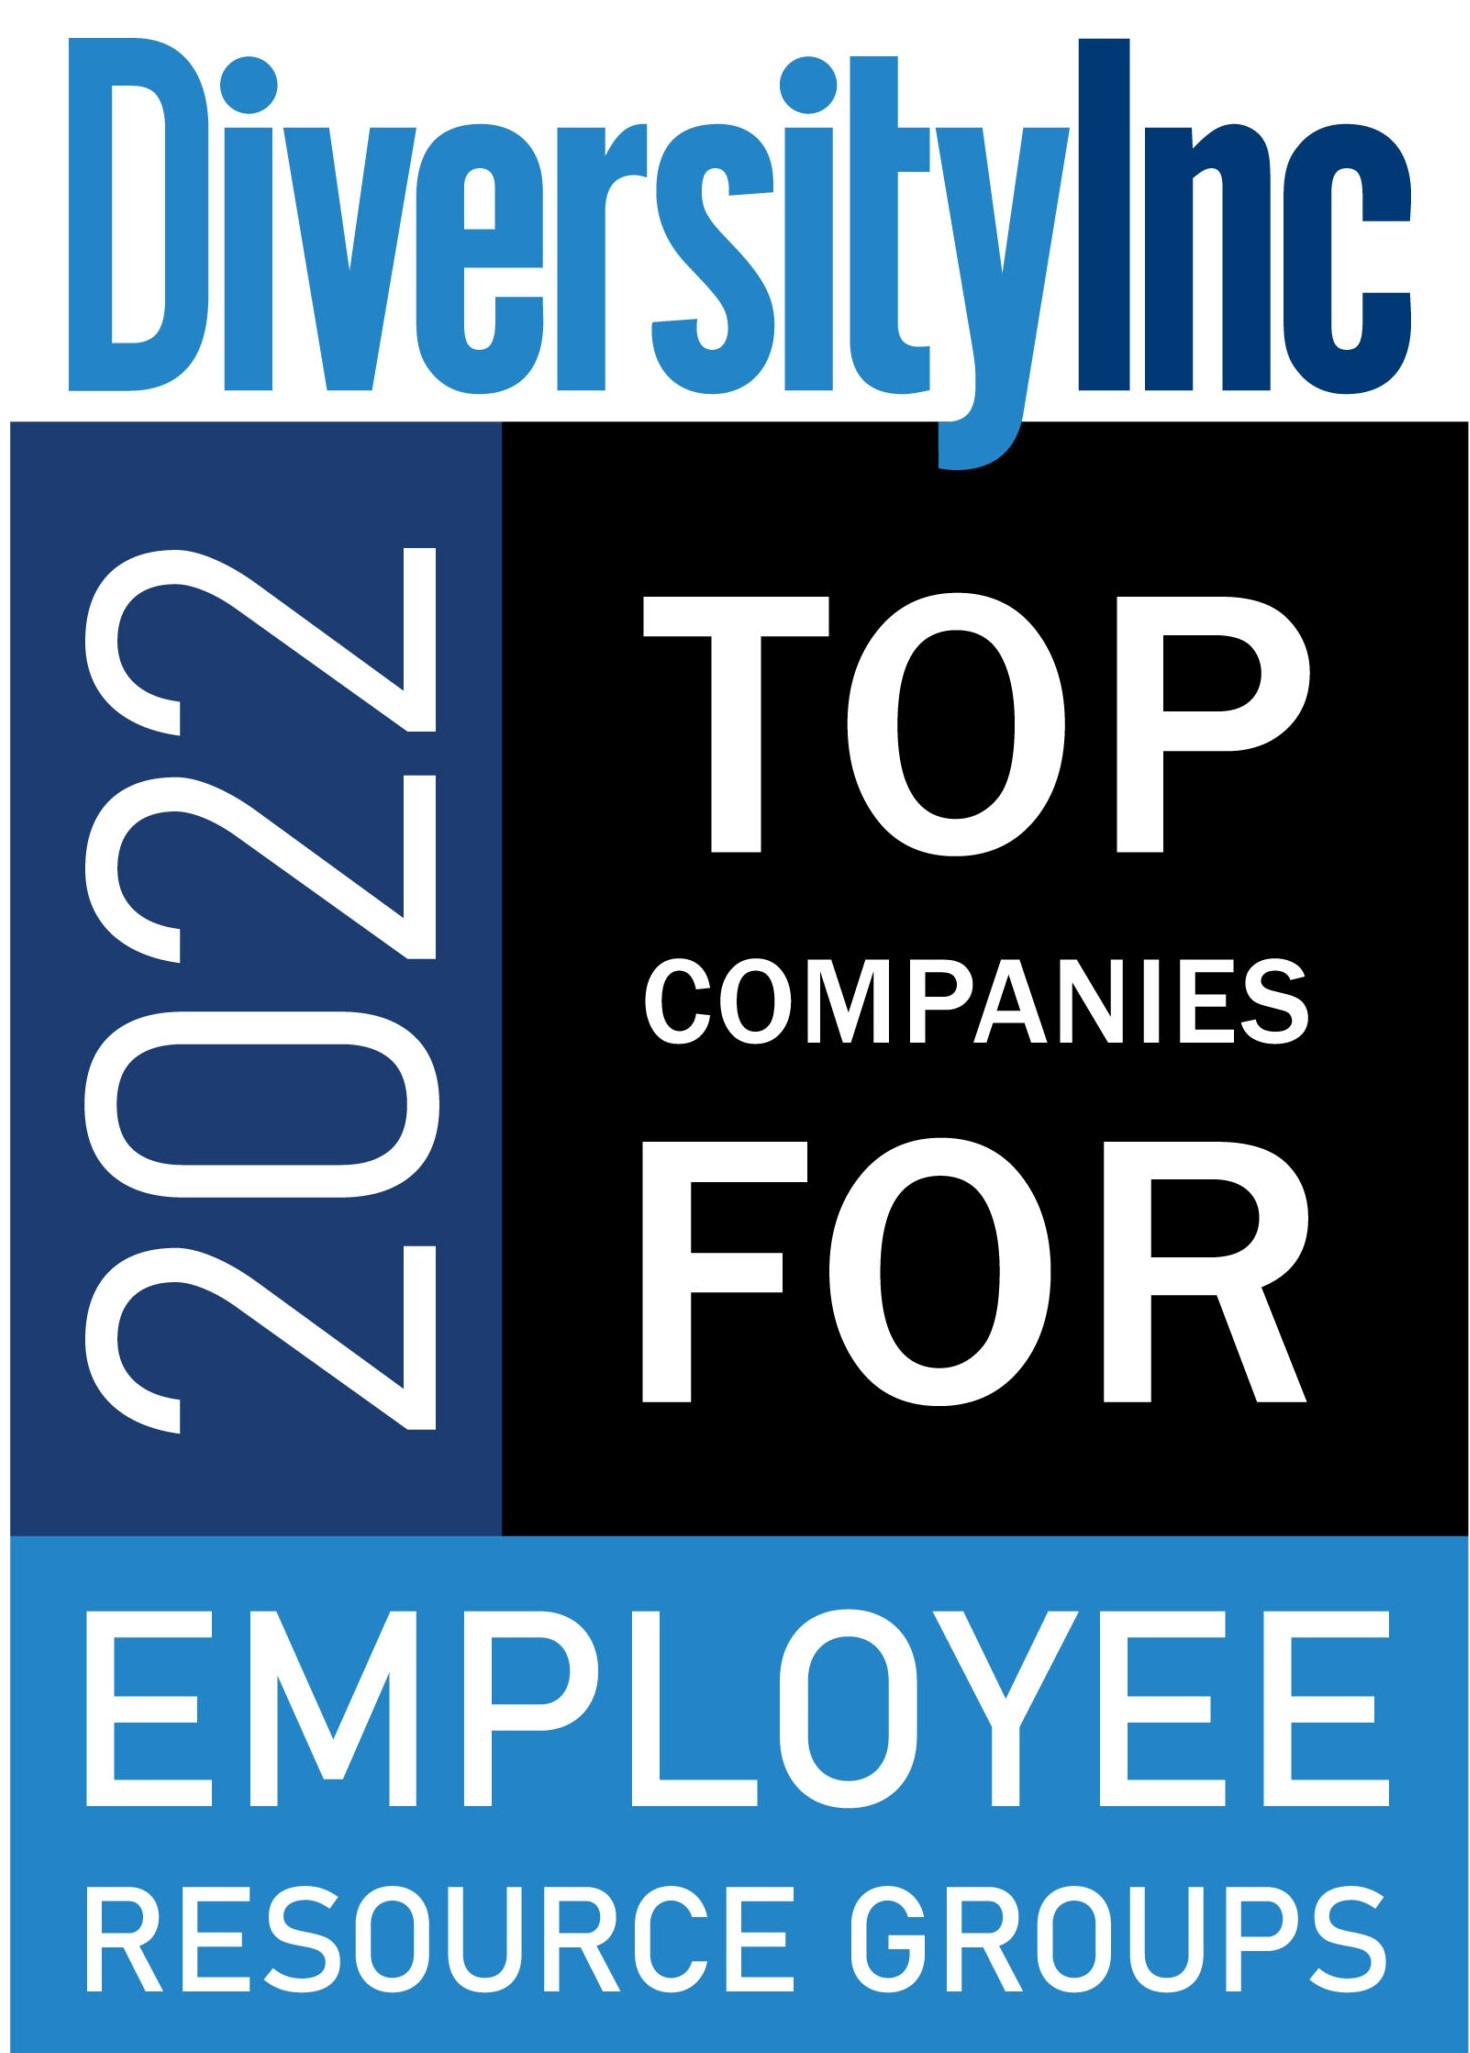 Diversity Inc. - Top Companies for Employee Resource Groups